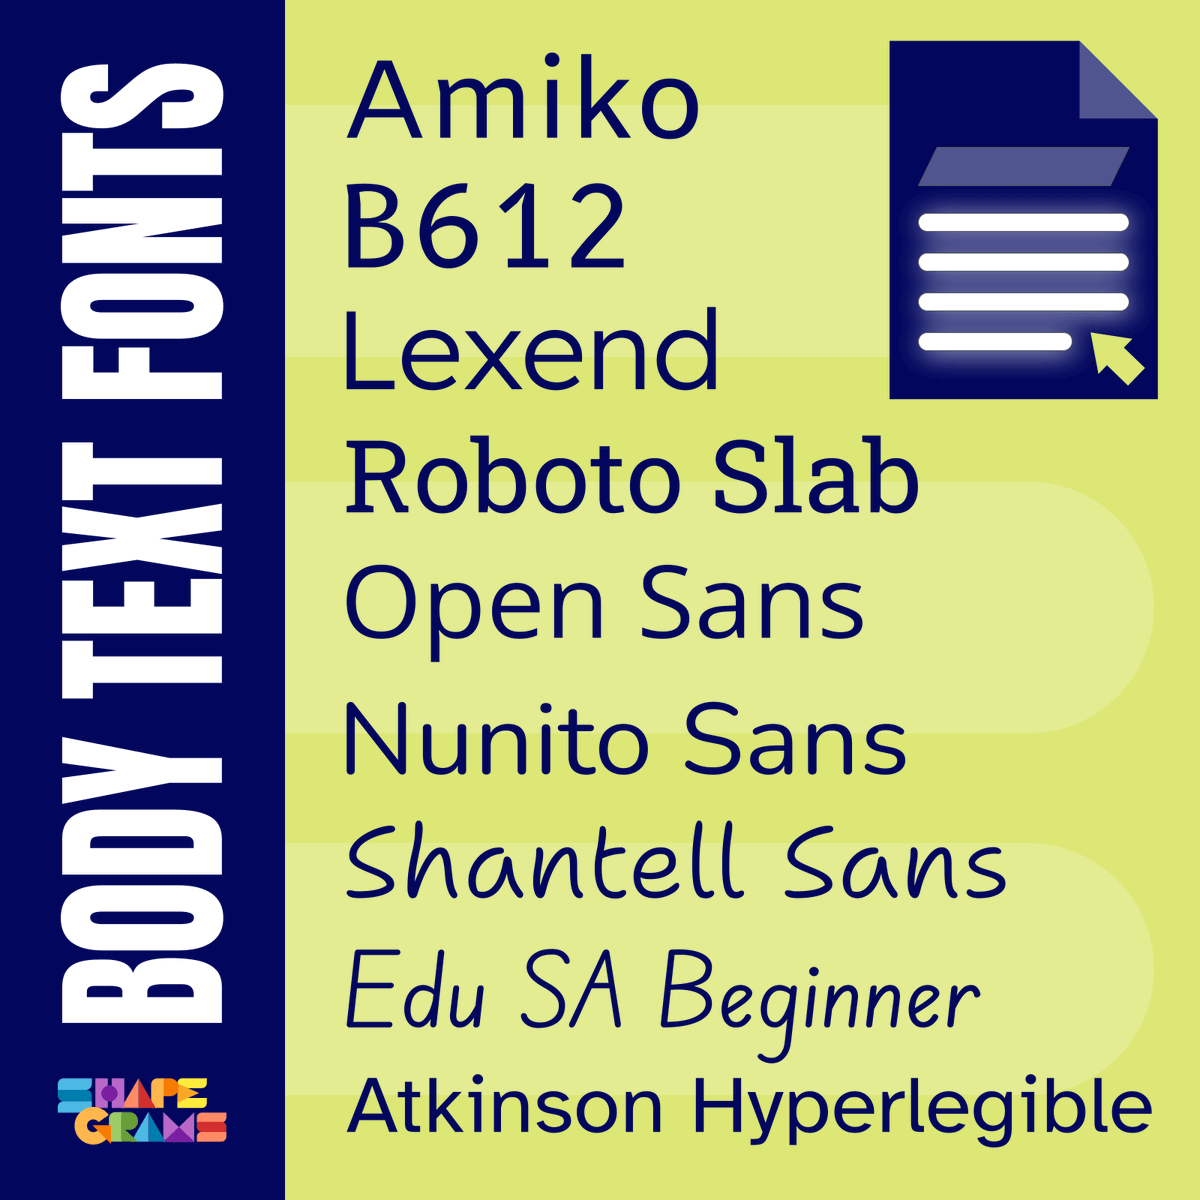 Choose highly legible fonts for the body text in your documents and designs. Ample spacing, open interiors, and distinguishable characters contribute to a font’s legibility. 

Use these fonts in Google Workspace or download them free from fonts.google.com. #CampPlugandPlay